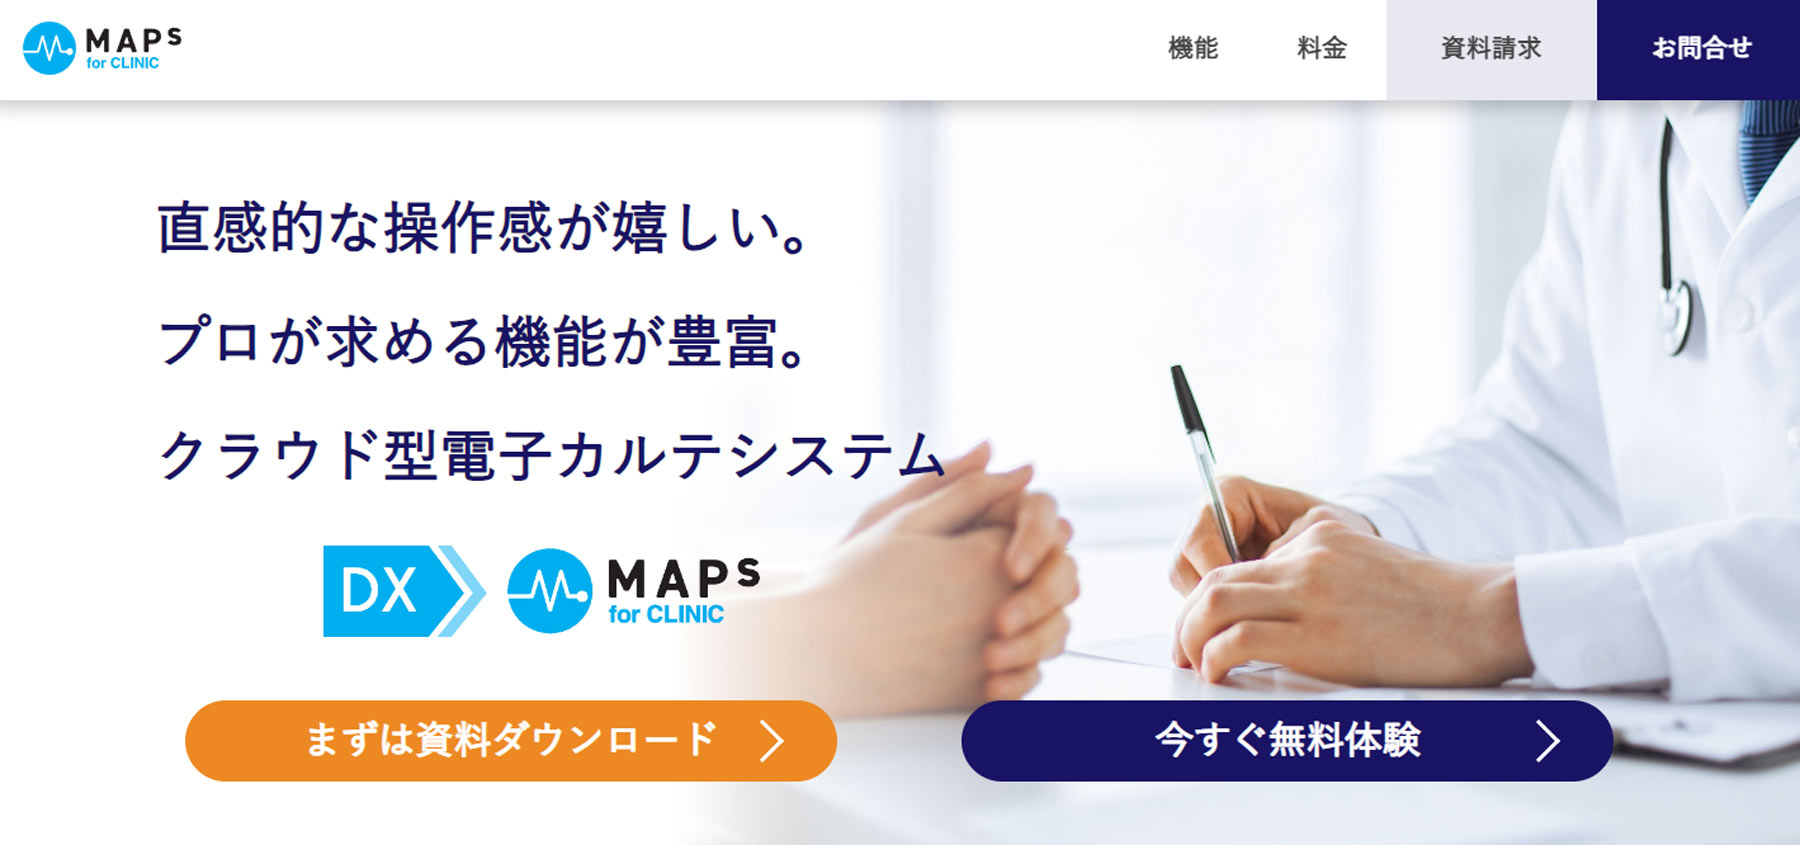 MAPs for CLINIC公式Webサイト